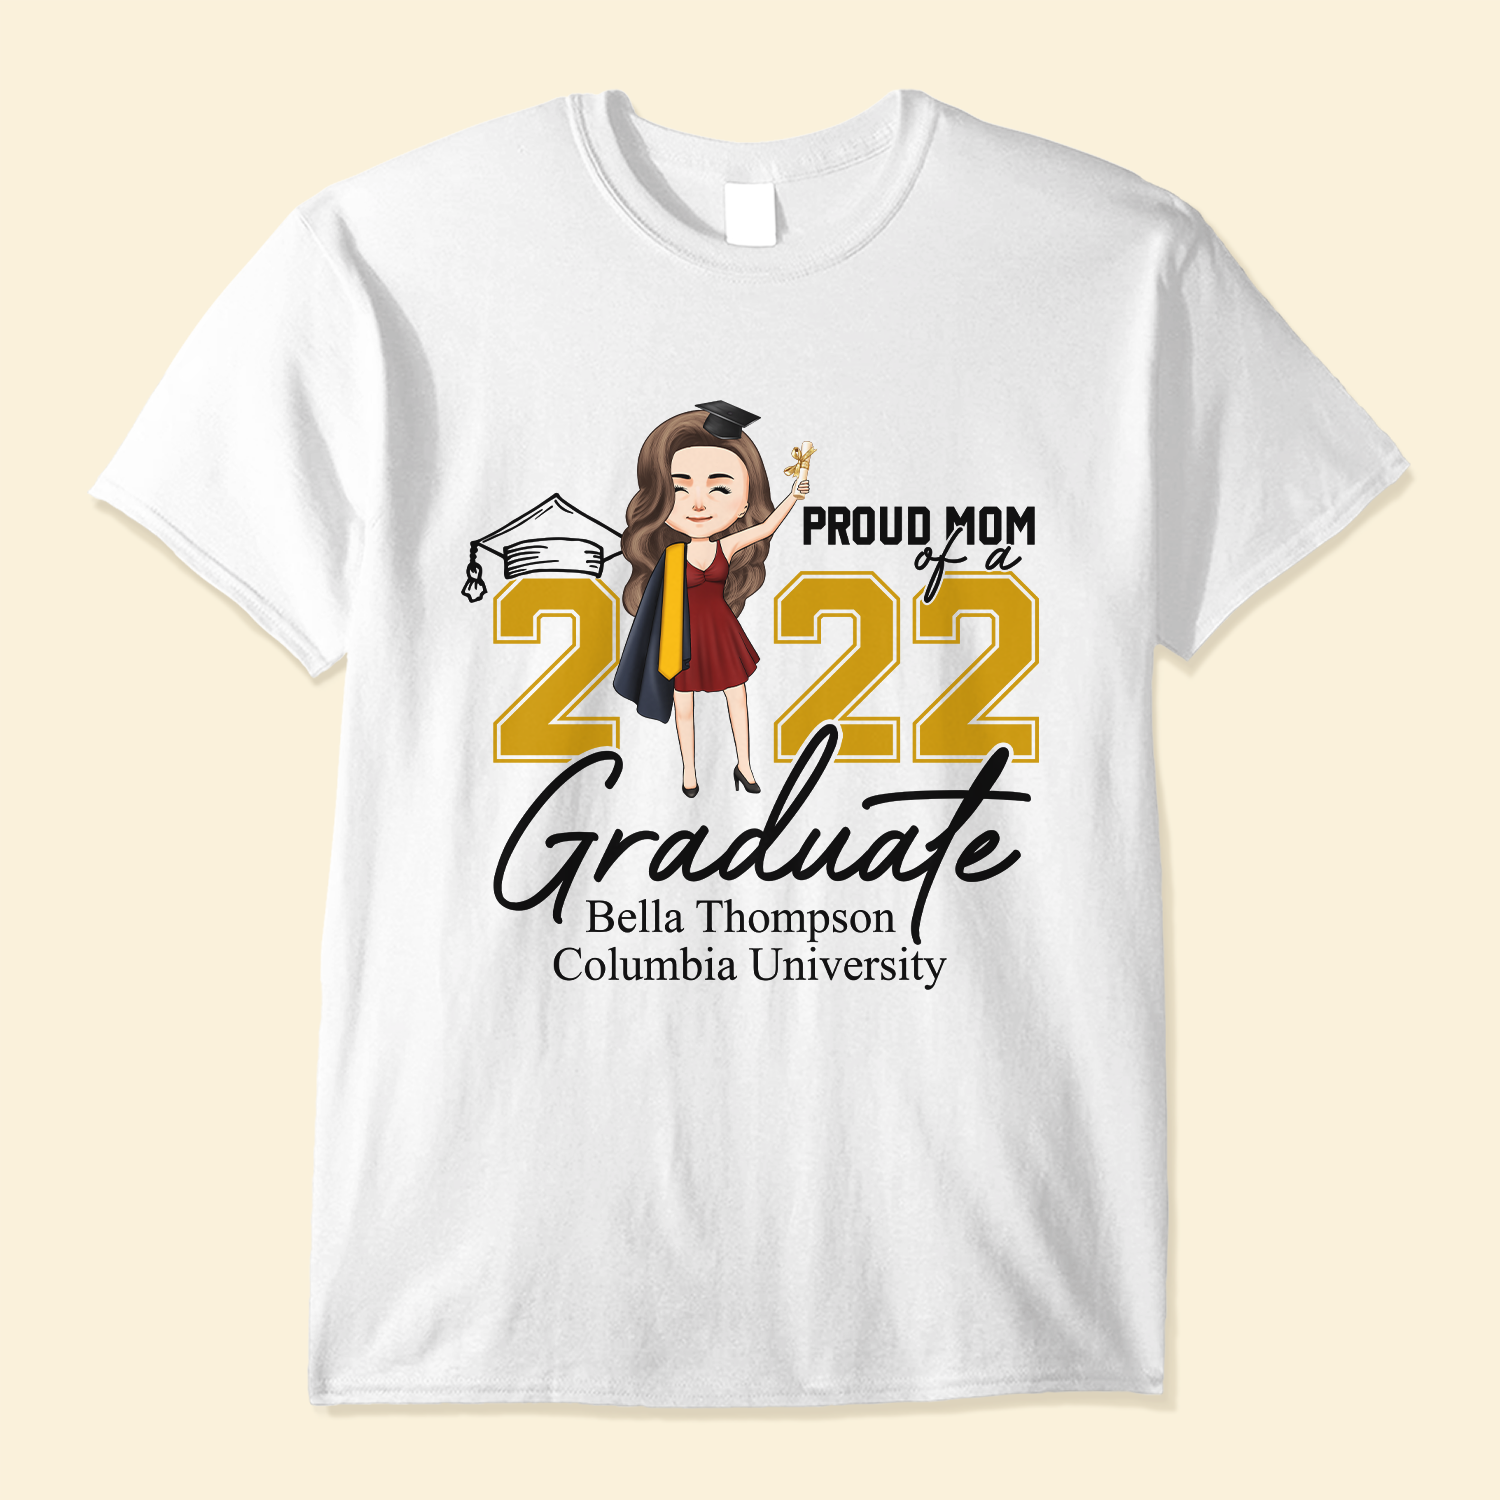 Proud Family Of A 2022 Graduate - Personalized Shirt - Graduation, Year End, School Leaving Gift For Graduate Student'S Family, Seniors' Mom & Dad, Brother & Sister